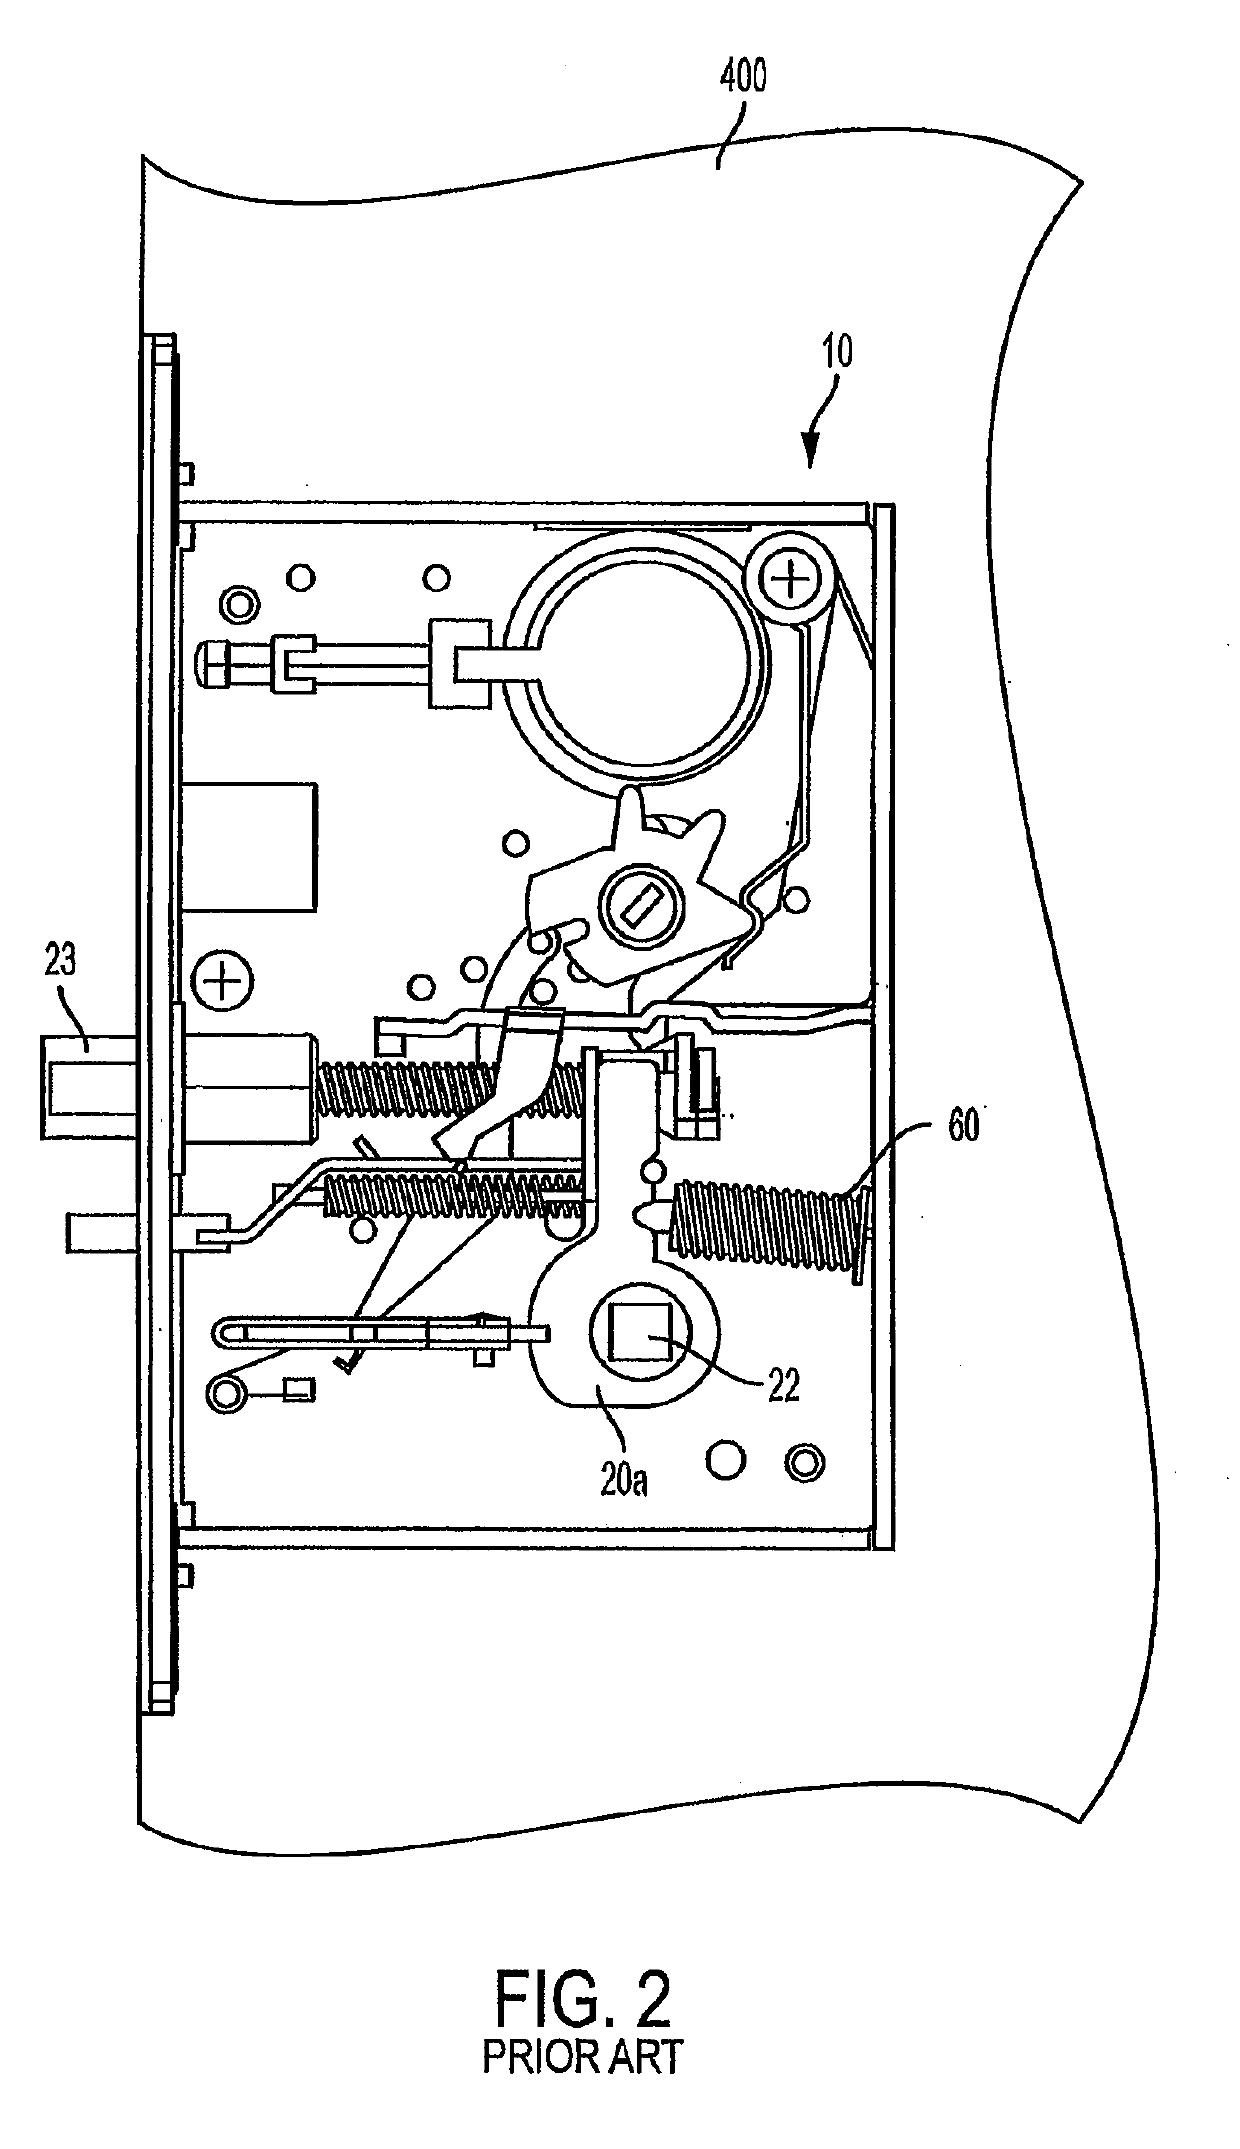 Mortise lock with multi-point latch system